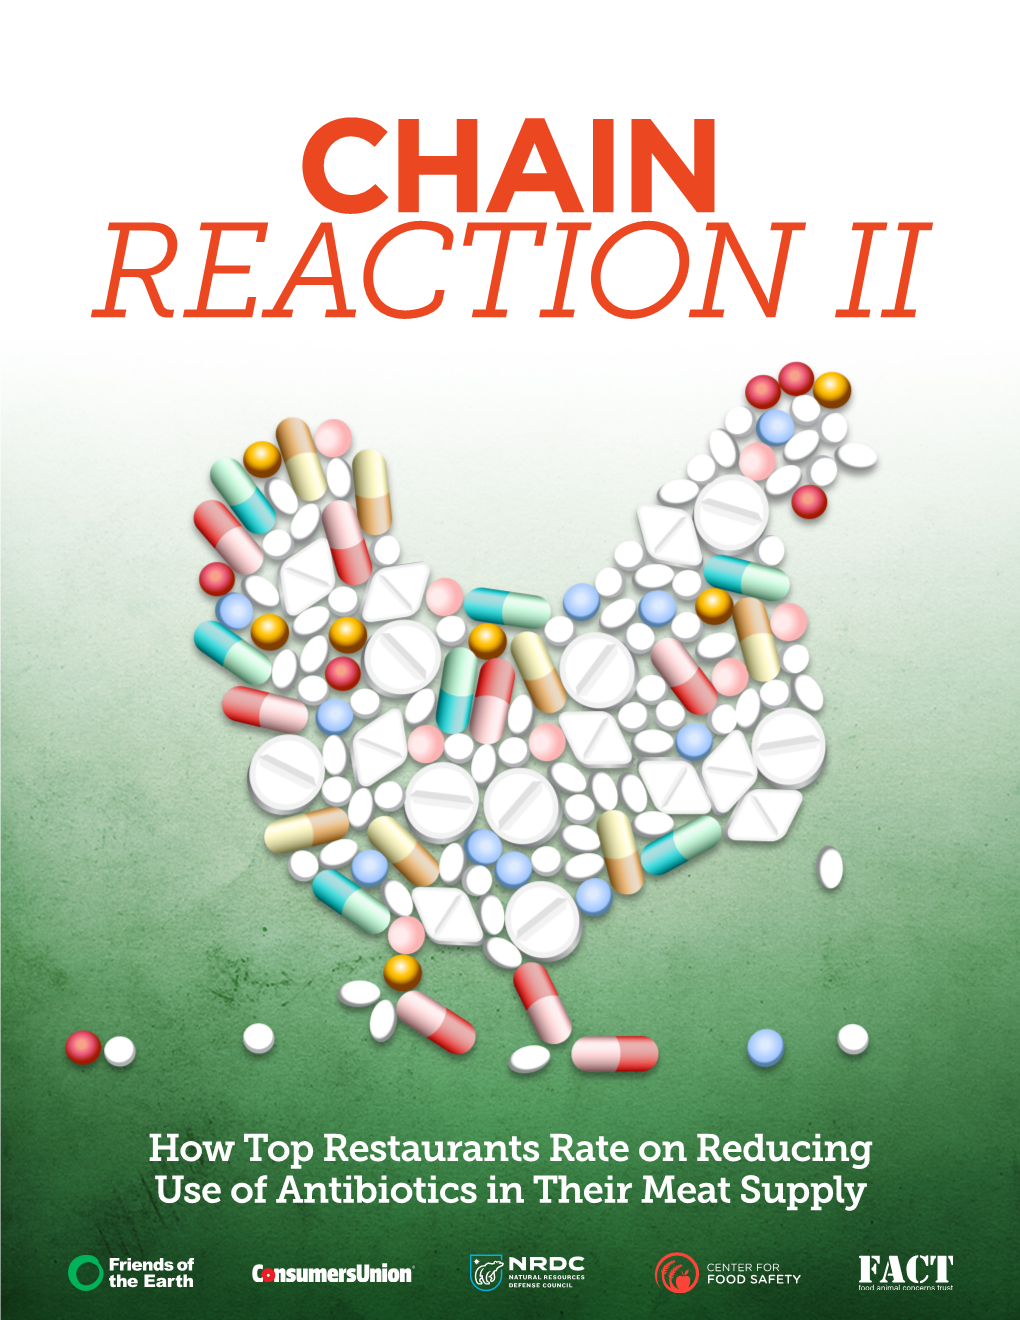 How Top Restaurants Rate on Reducing Use of Antibiotics in Their